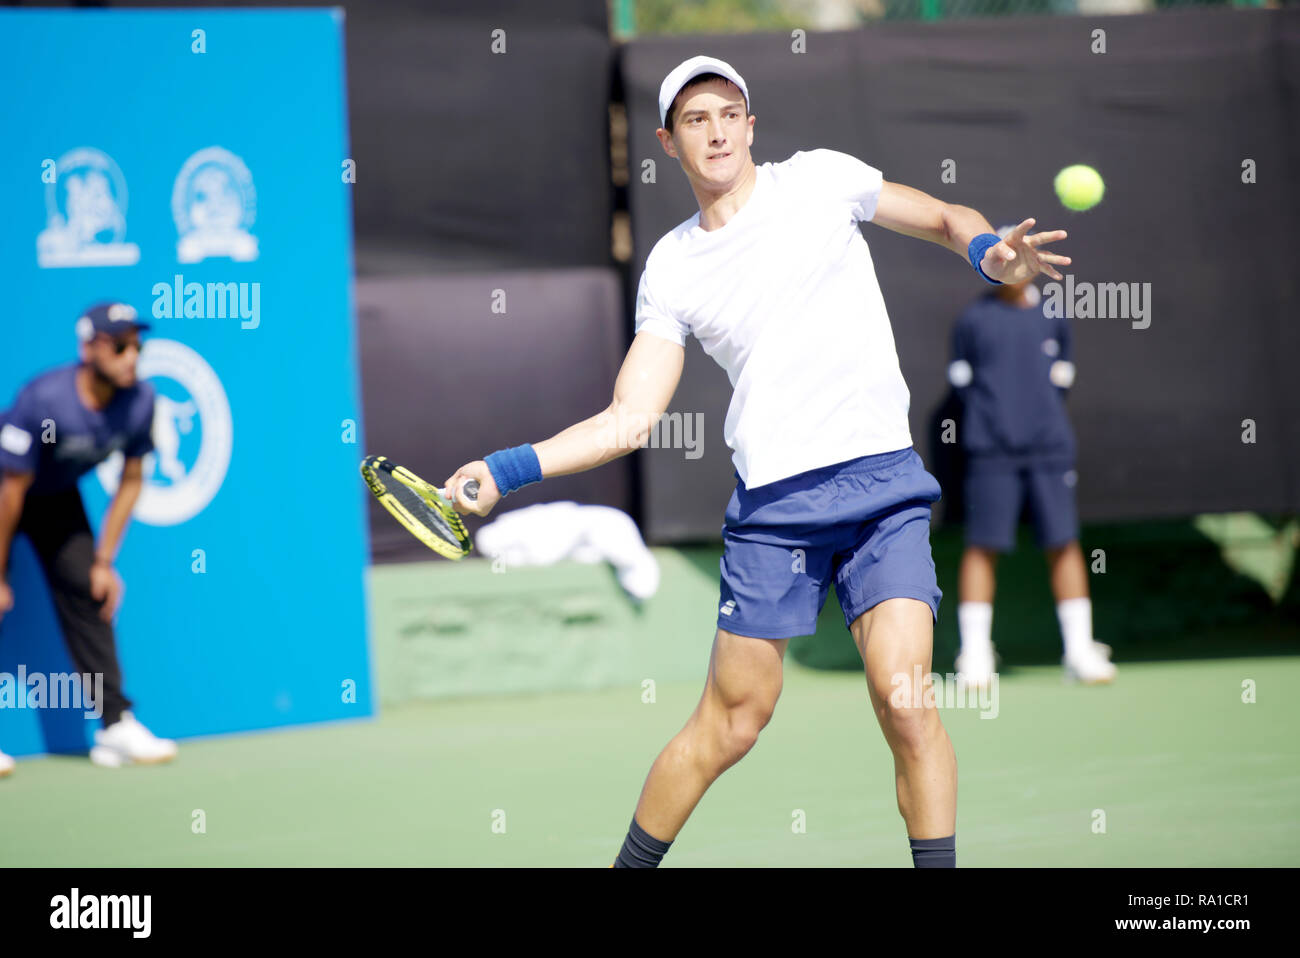 Pune, India. 30th December 2018. Antoine Hoang of France in action in the final round of qualifying singles competition at Tata Open Maharashtra ATP Tennis tournament in Pune, India. Credit: Karunesh Johri/Alamy Live News Stock Photo